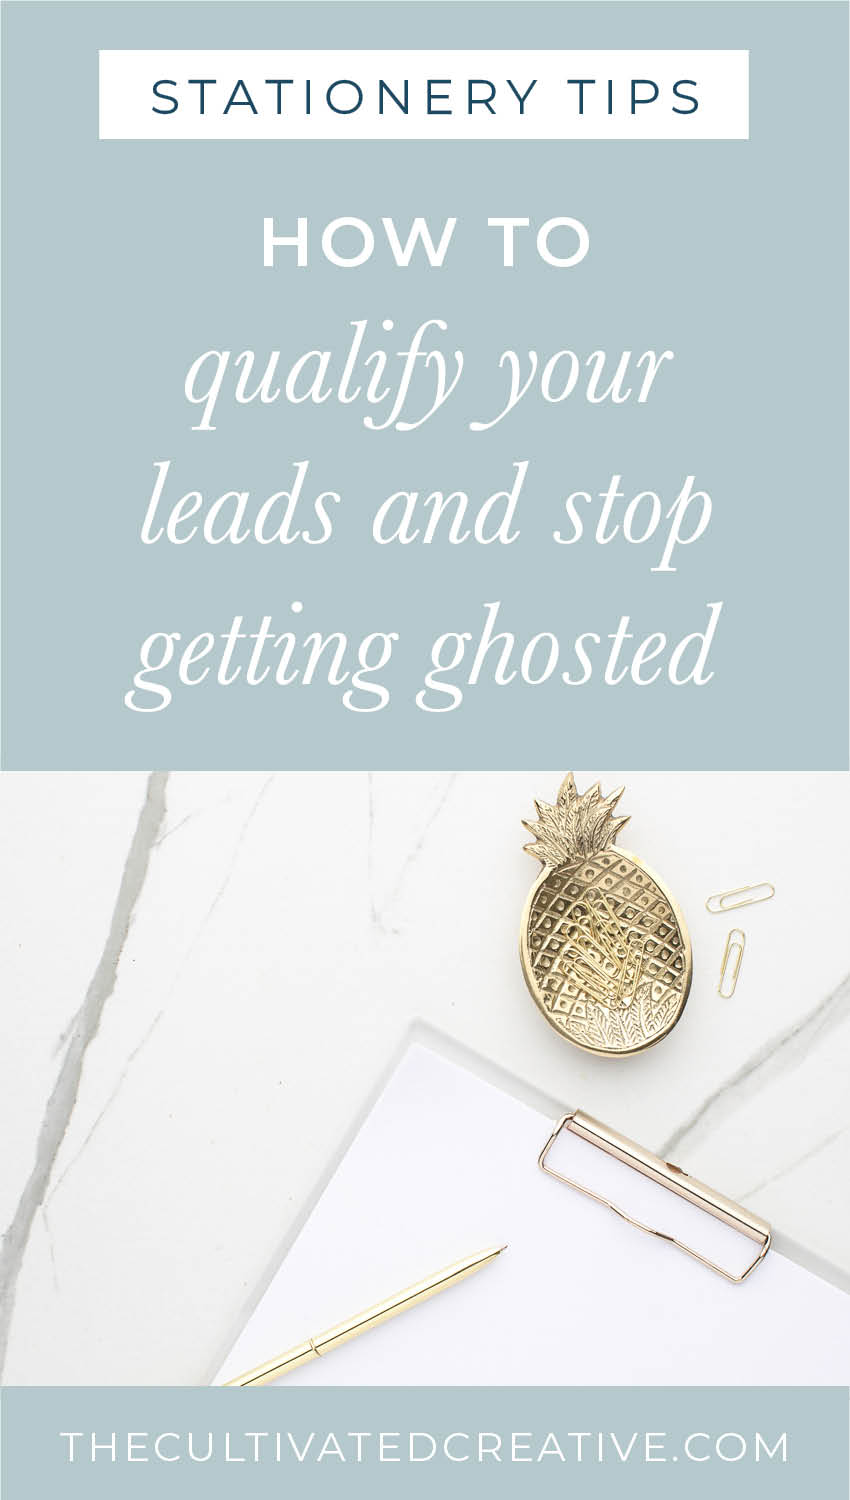 how to qualify your leads and stop getting ghosted as a stationery designer